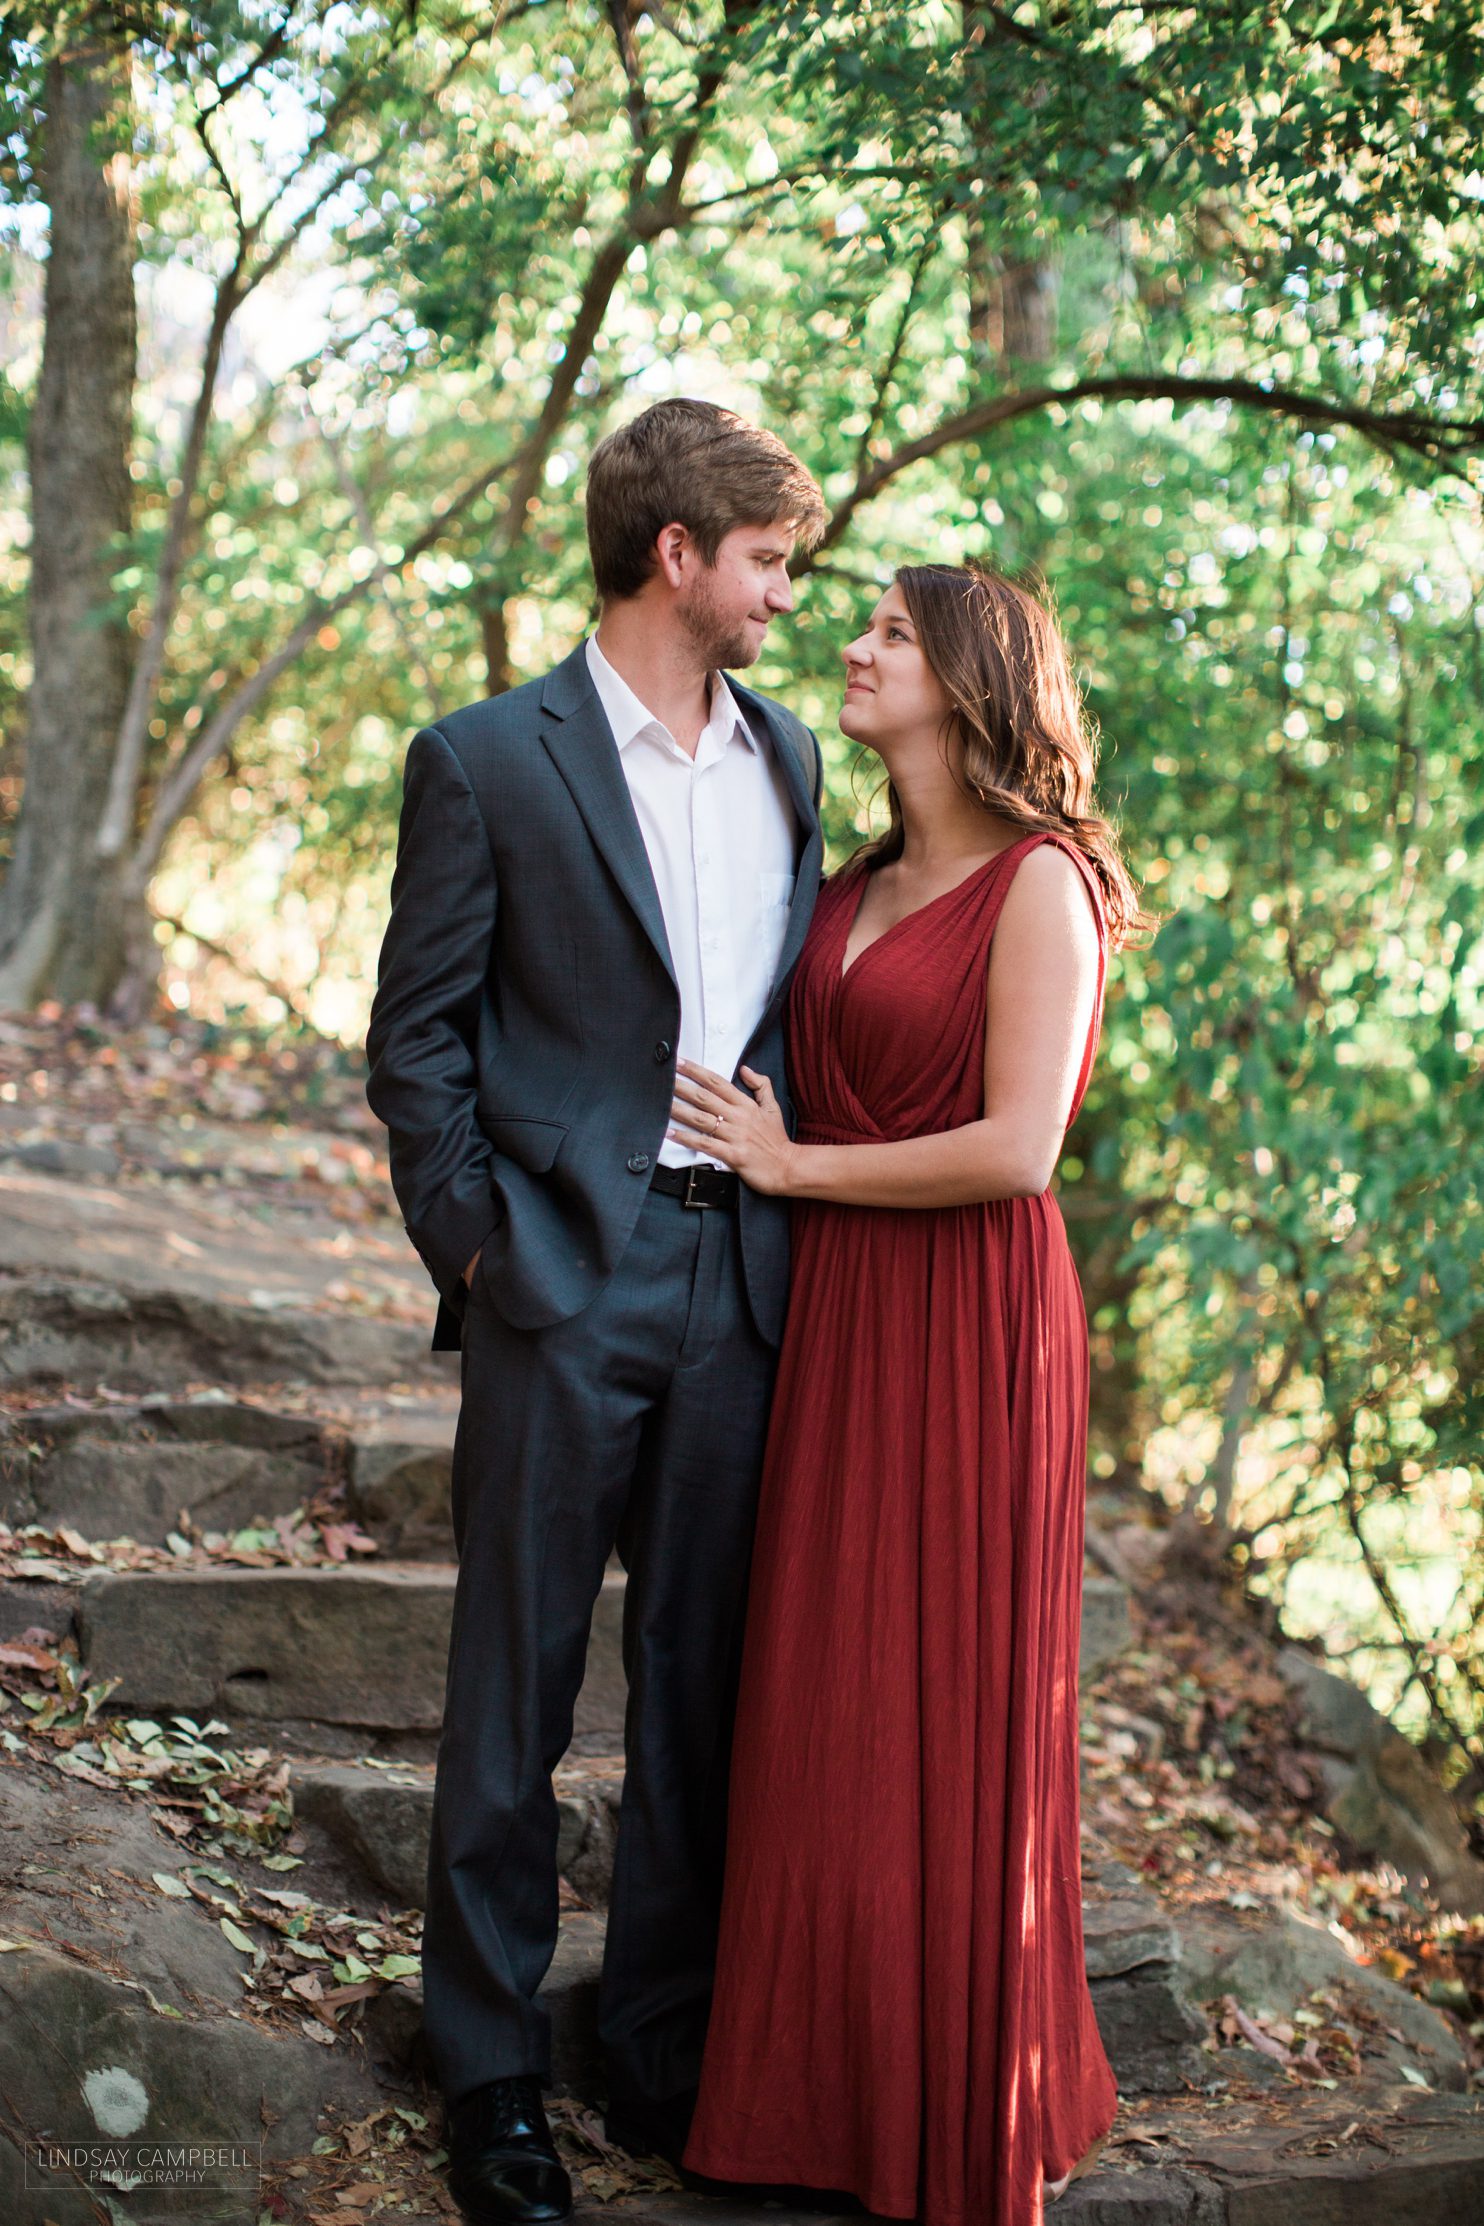 Kat-and-Tyler-Chattanooga-Engagement-Session-Lookout-Mountain-Engagement-photos-chattanooga-wedding-photographer_0029 Kat + Tyler // Chattanooga Lifestyle Engagement Session on Sunset Rock // Chattanooga Wedding Photographer